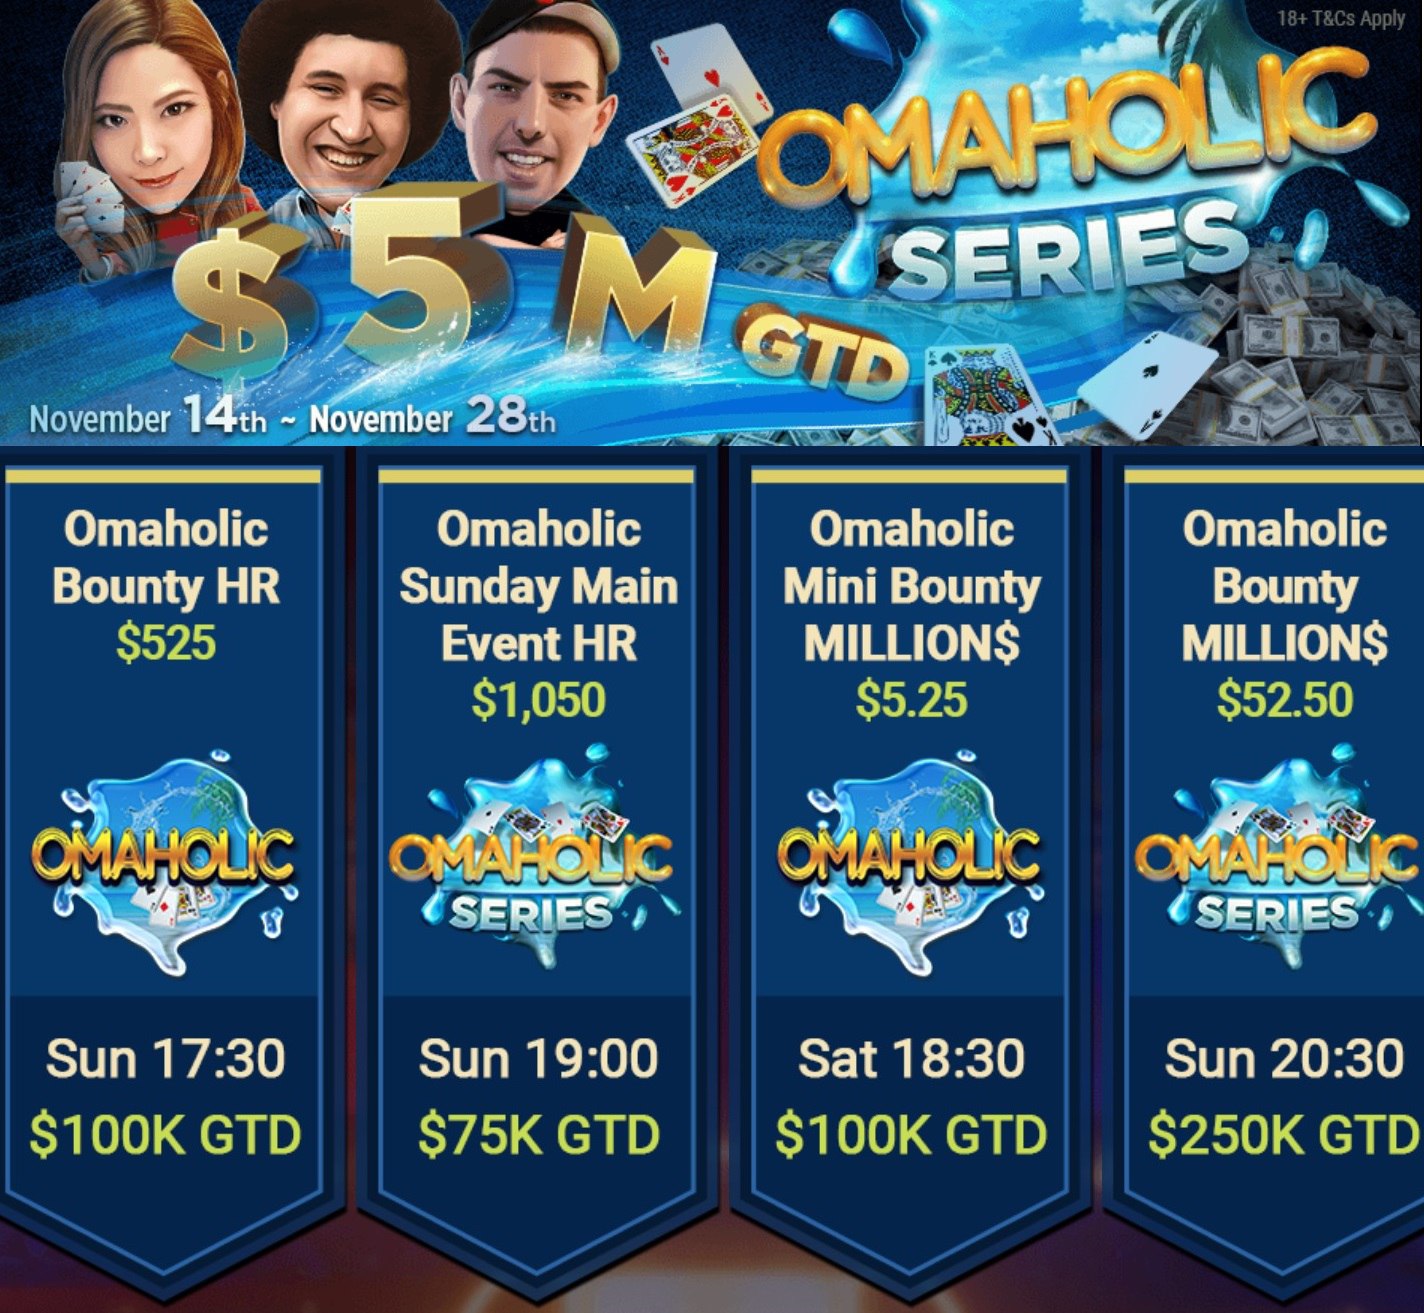 GGpoker Omaholic Series with \$5,000,000 GTD